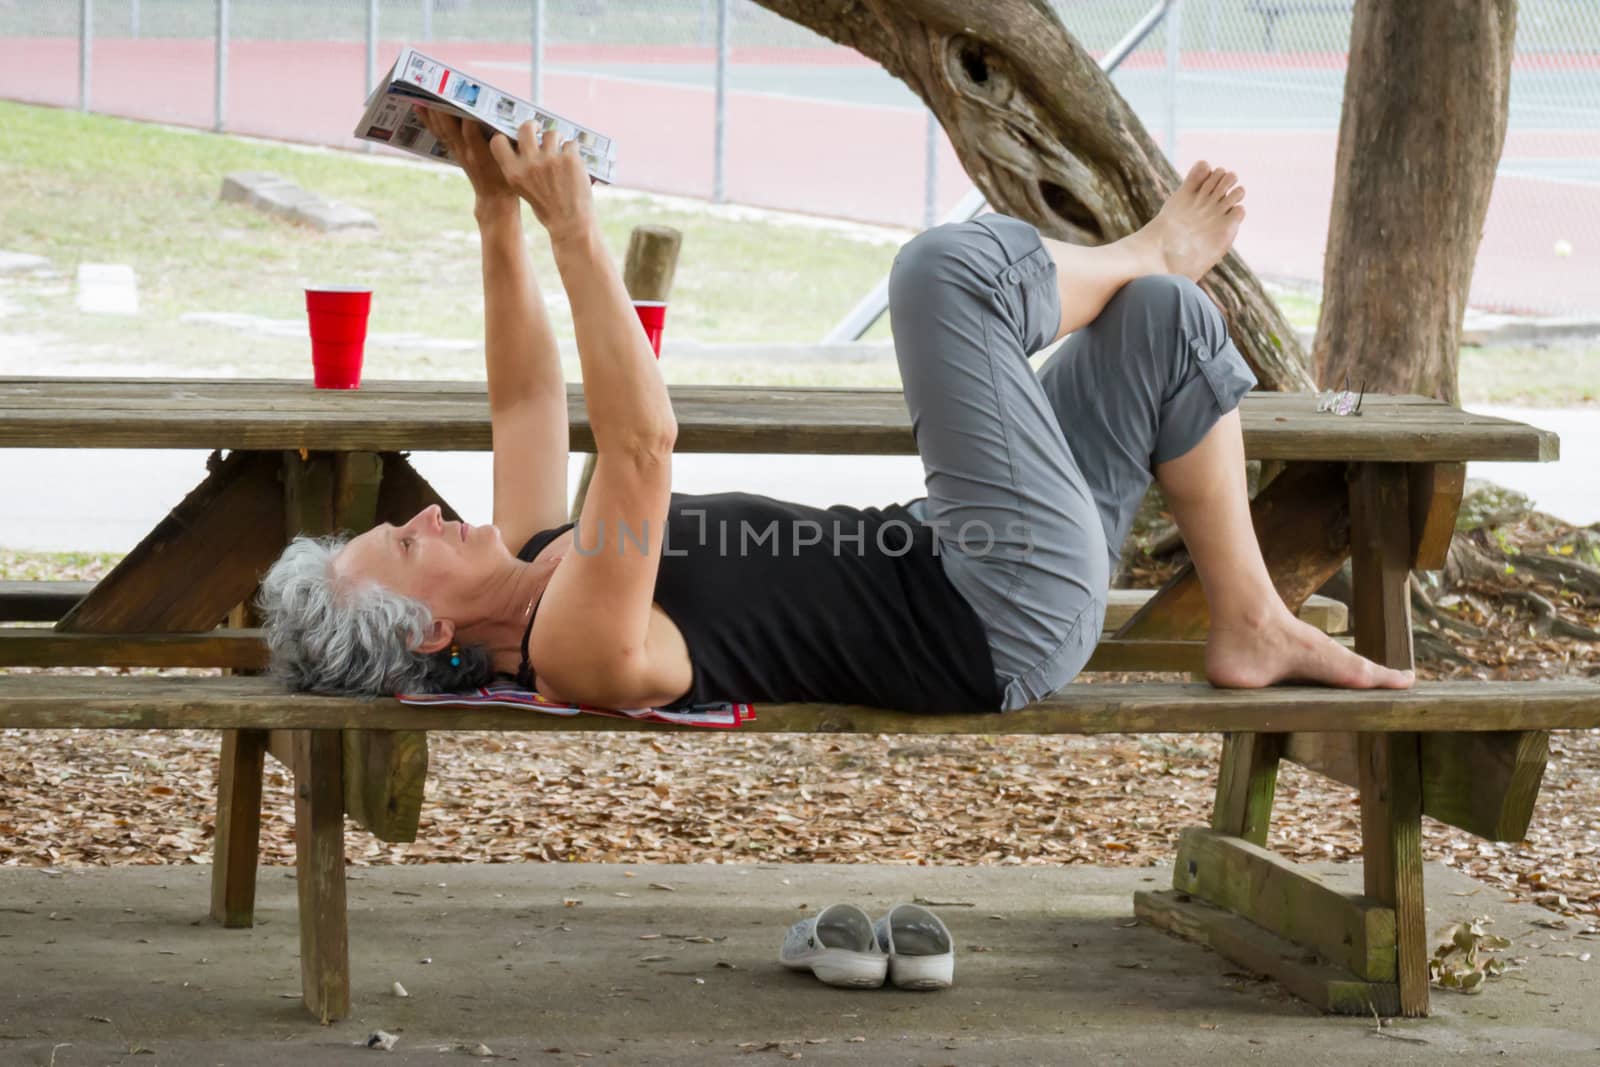 A woman reading a flyer on a picnic table